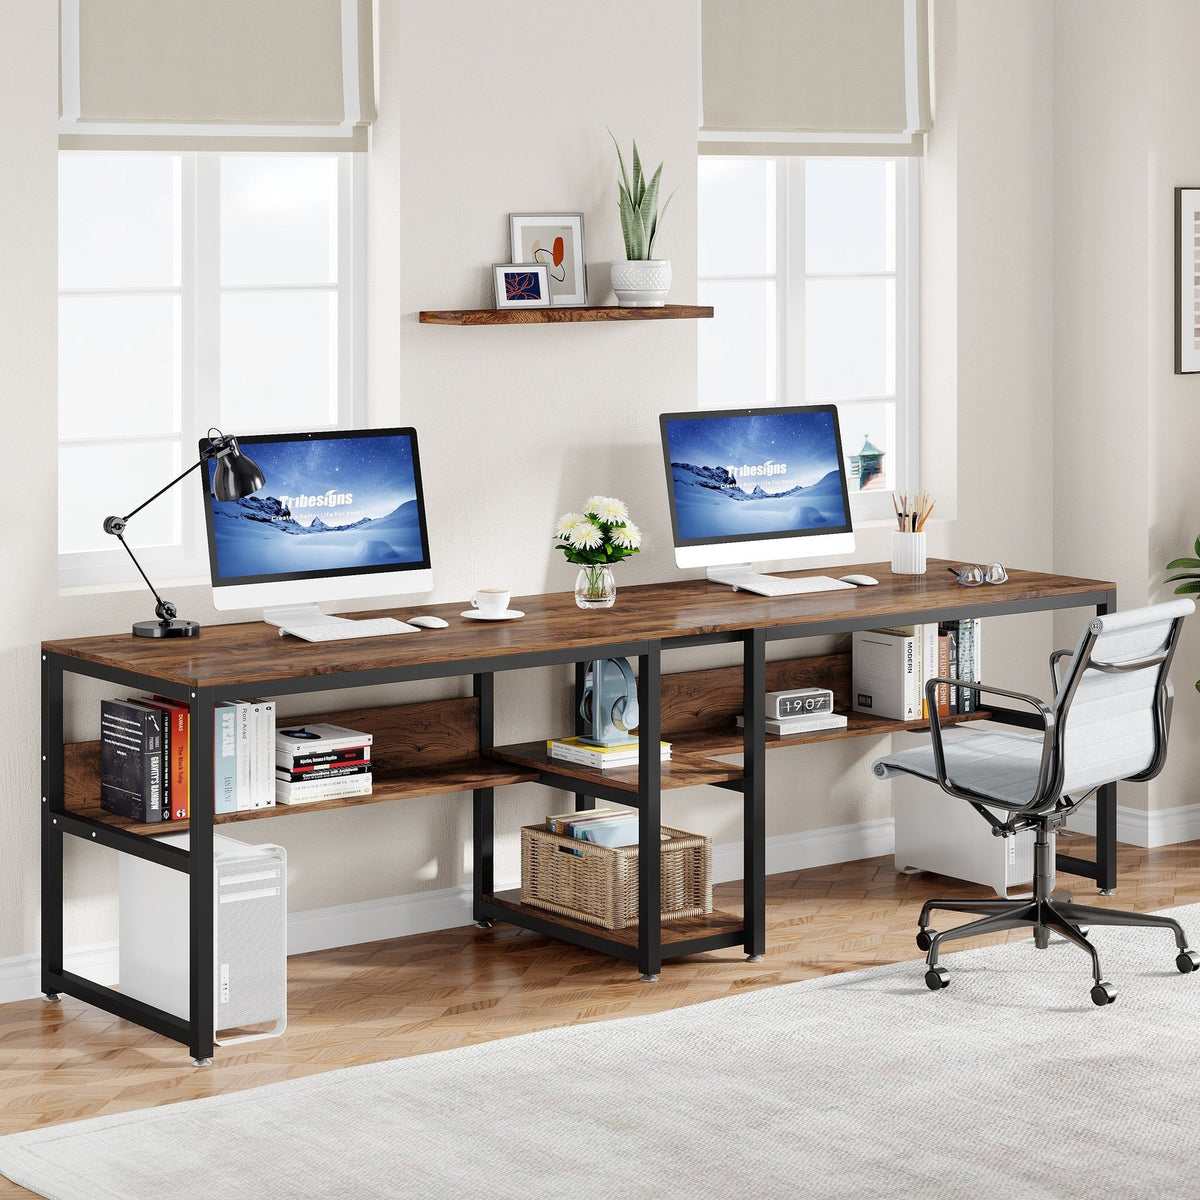 Home - Office Product Center